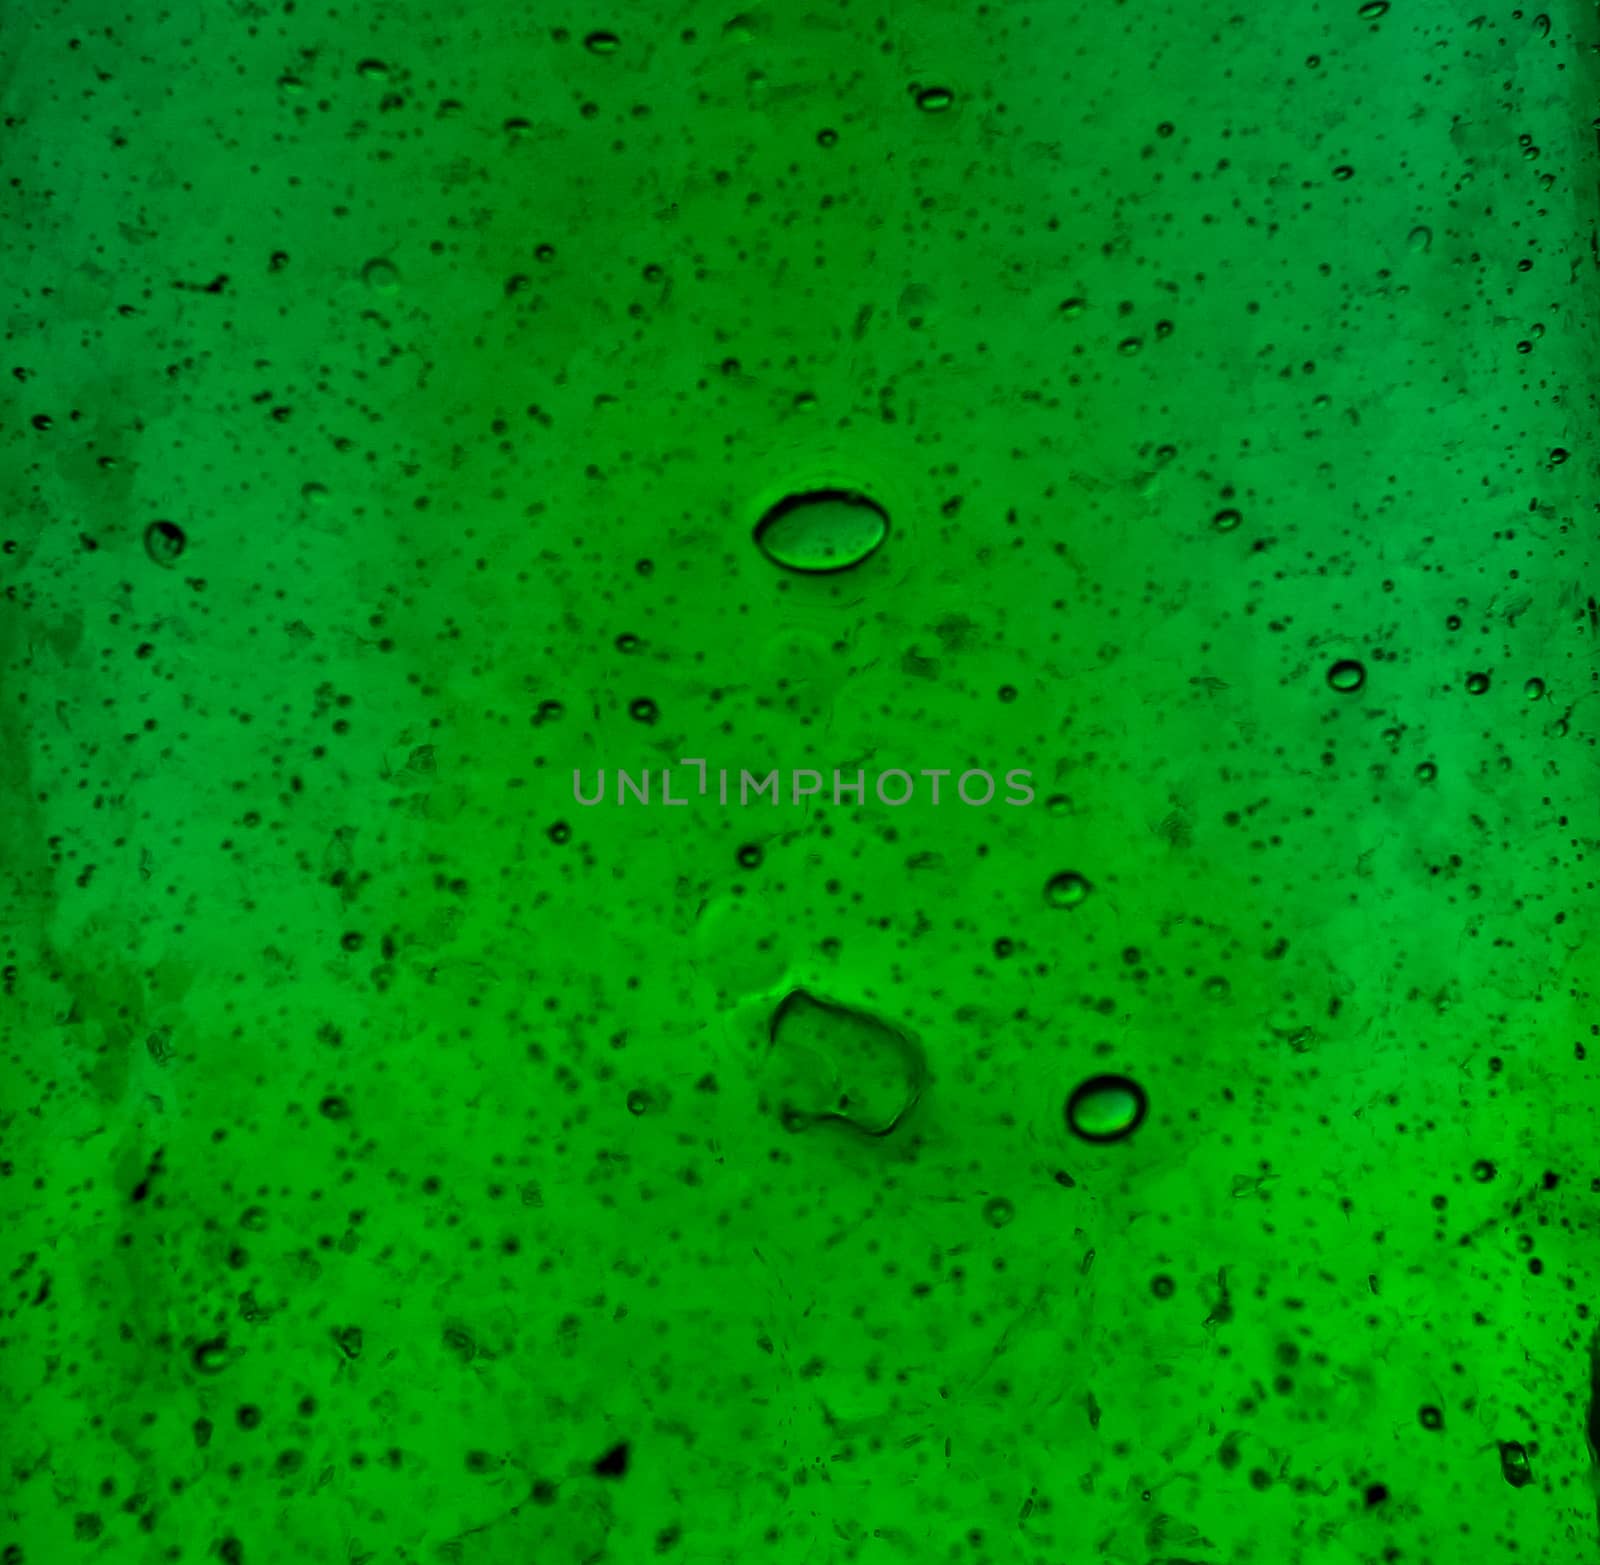 Texture of green glass bottles by Oleczka11